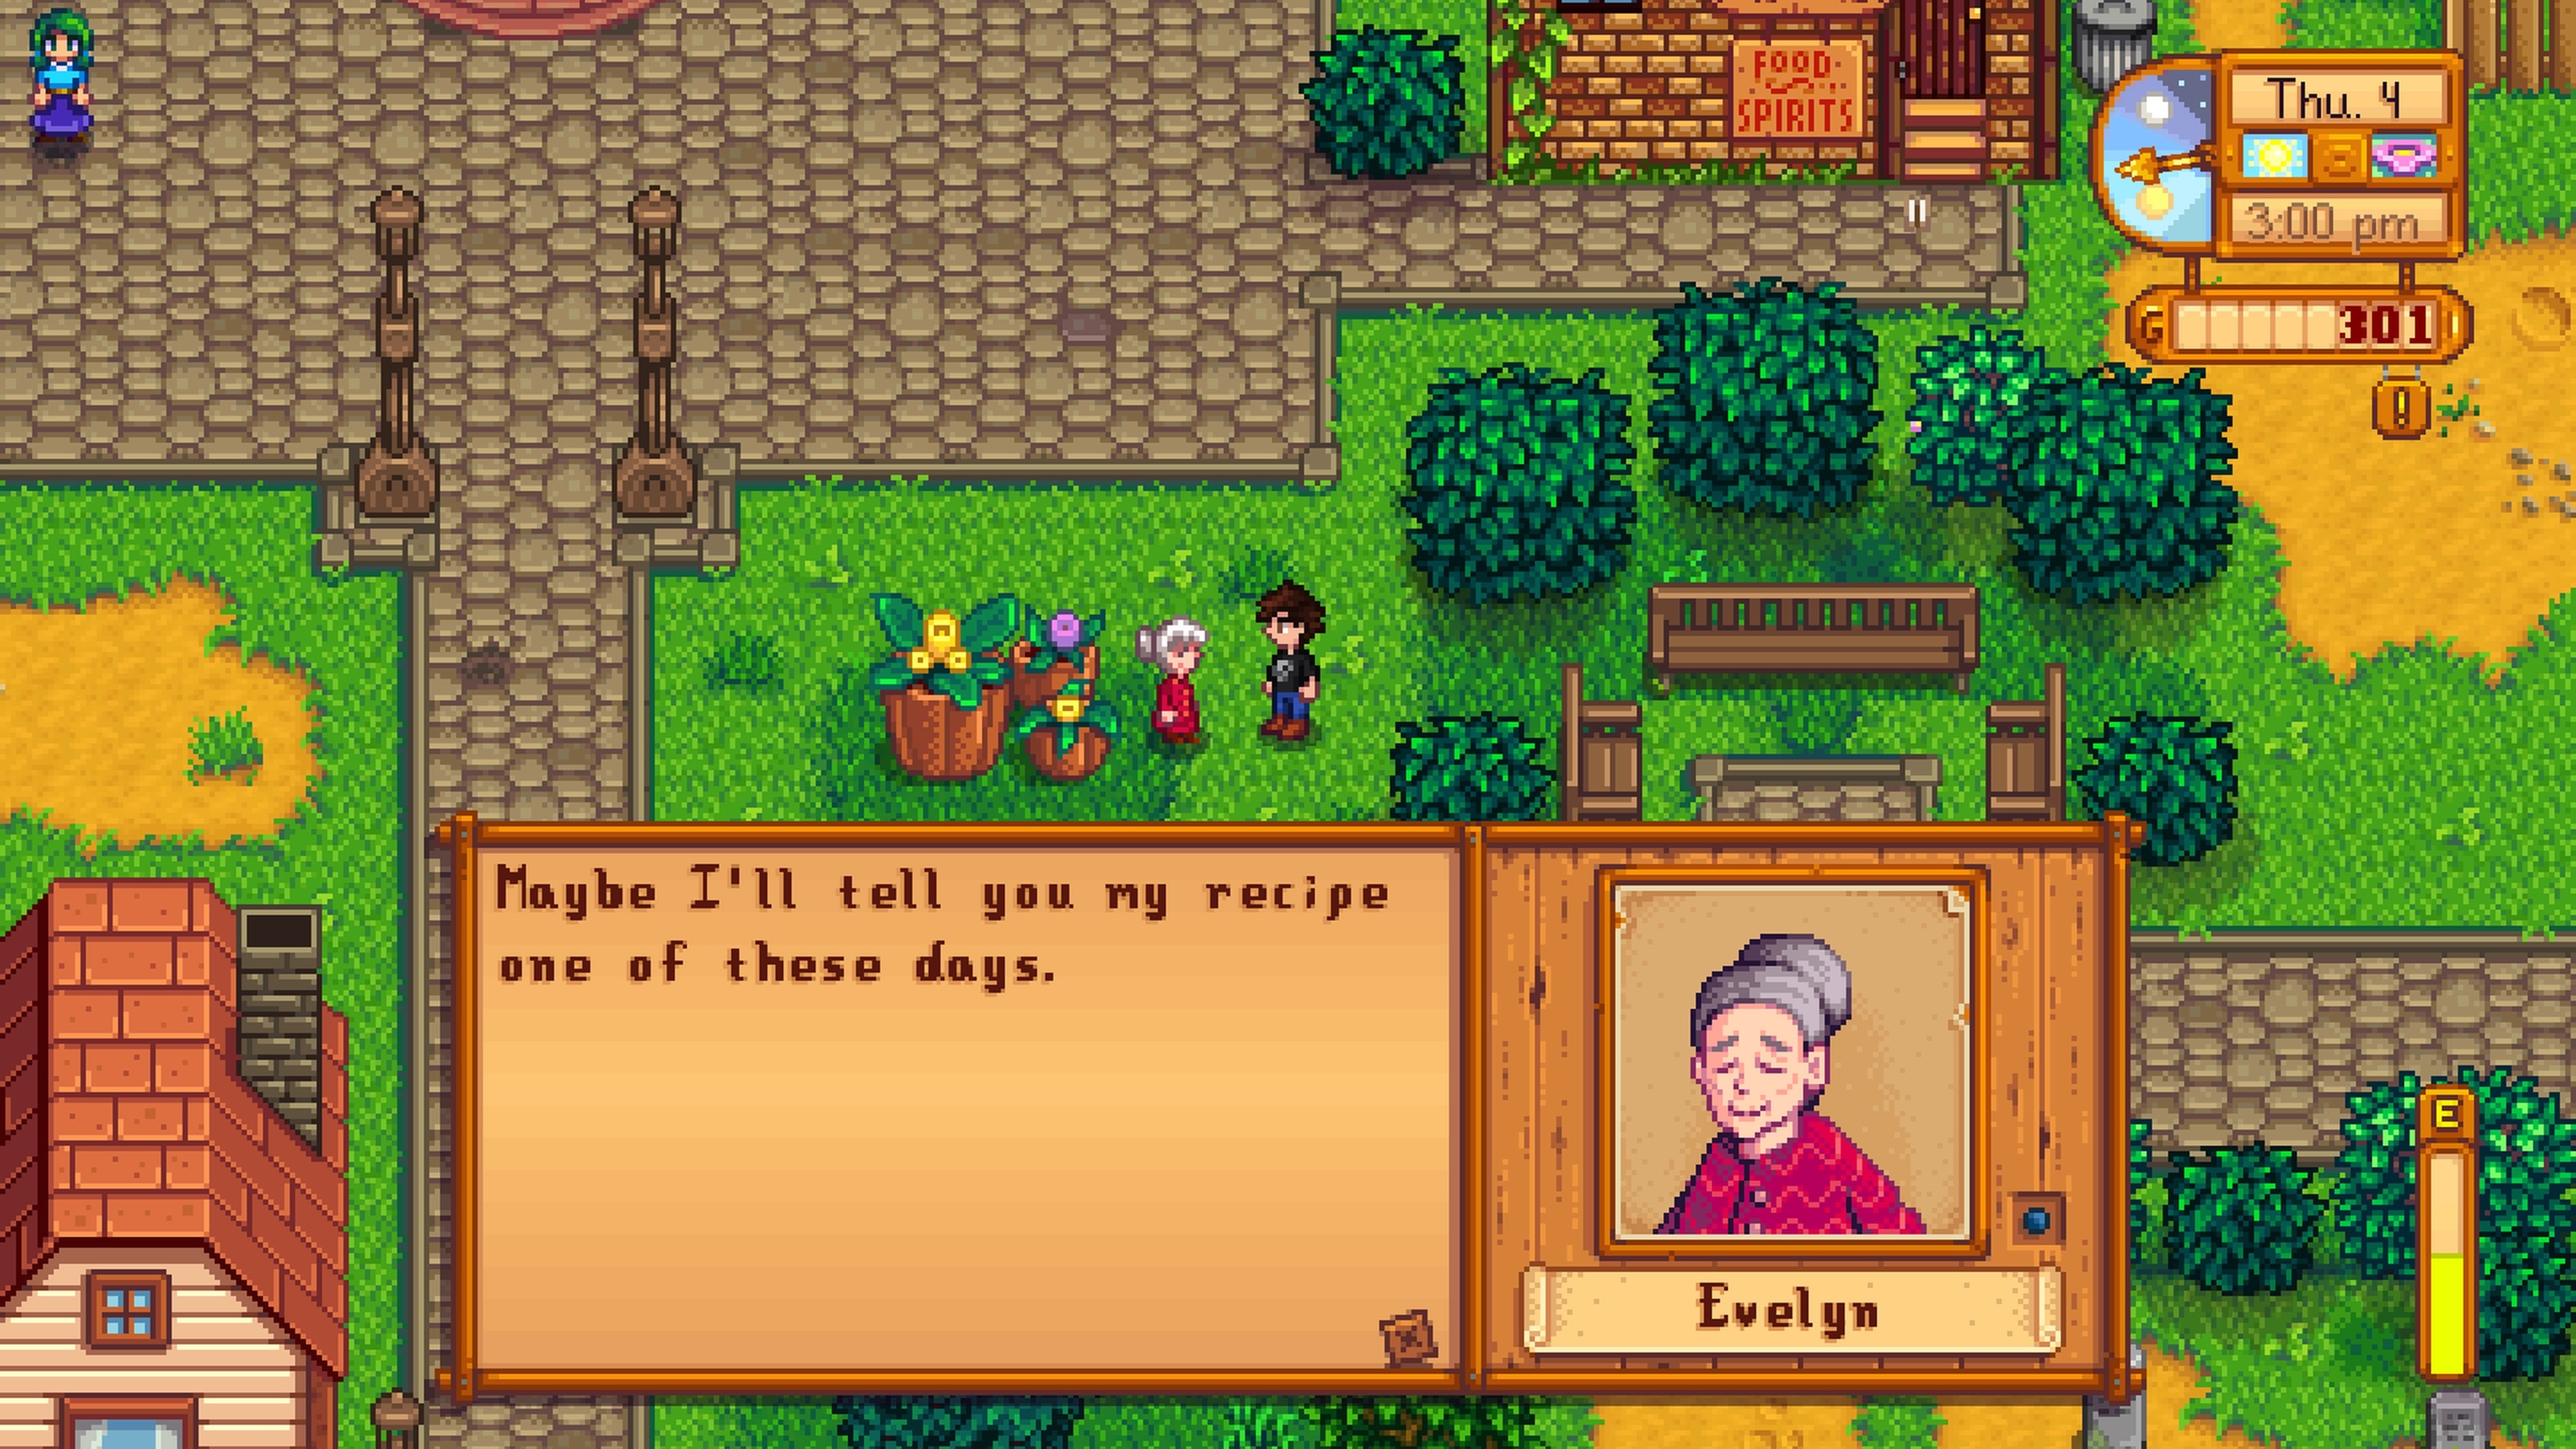 Whole game. Джоди Stardew Valley. Evelyn screenshots из какой игры.